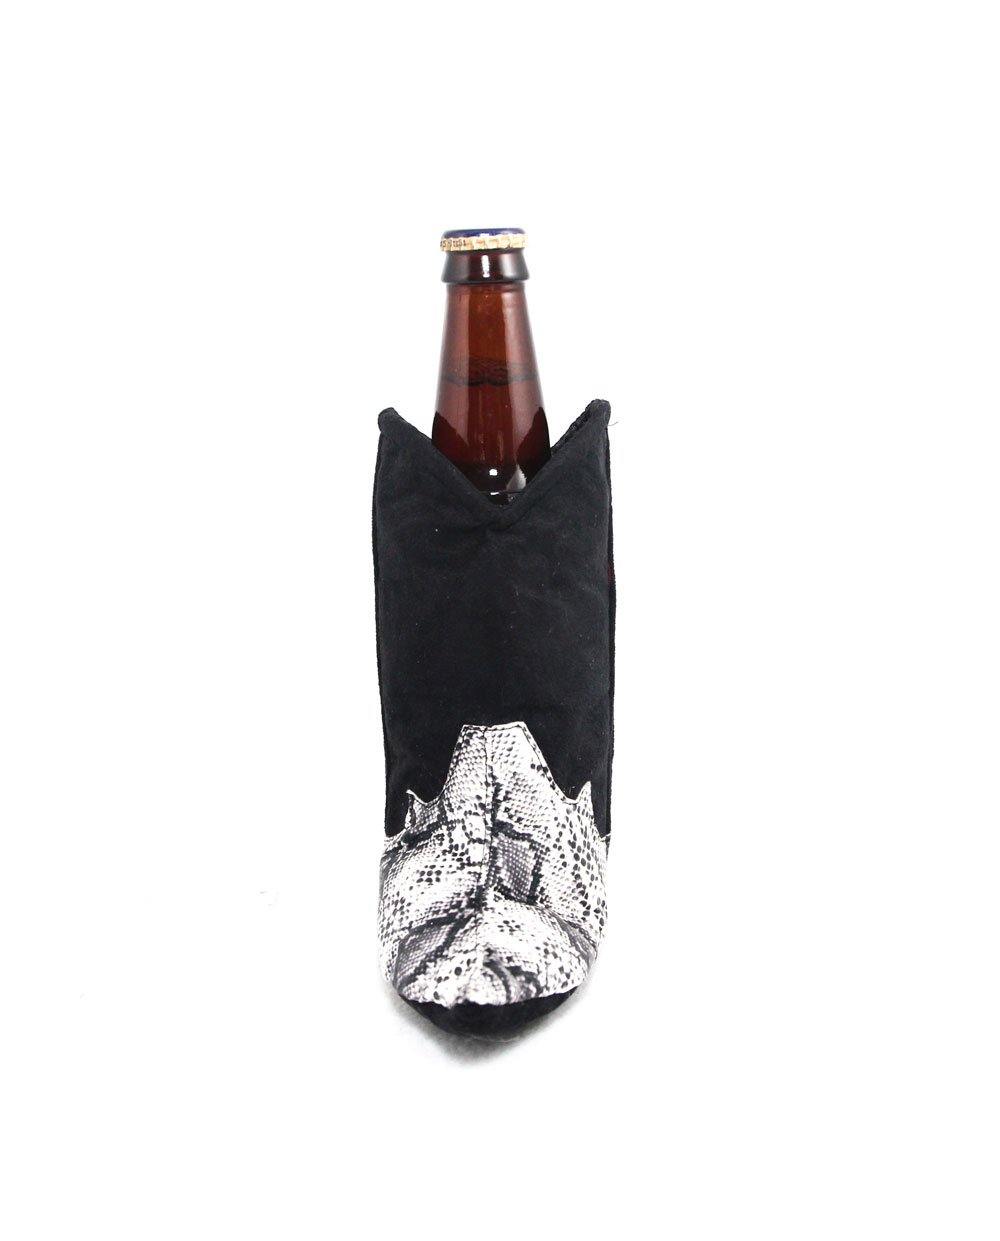 Boot Coosie for Beer and Water Bottles by Tipsy Totes